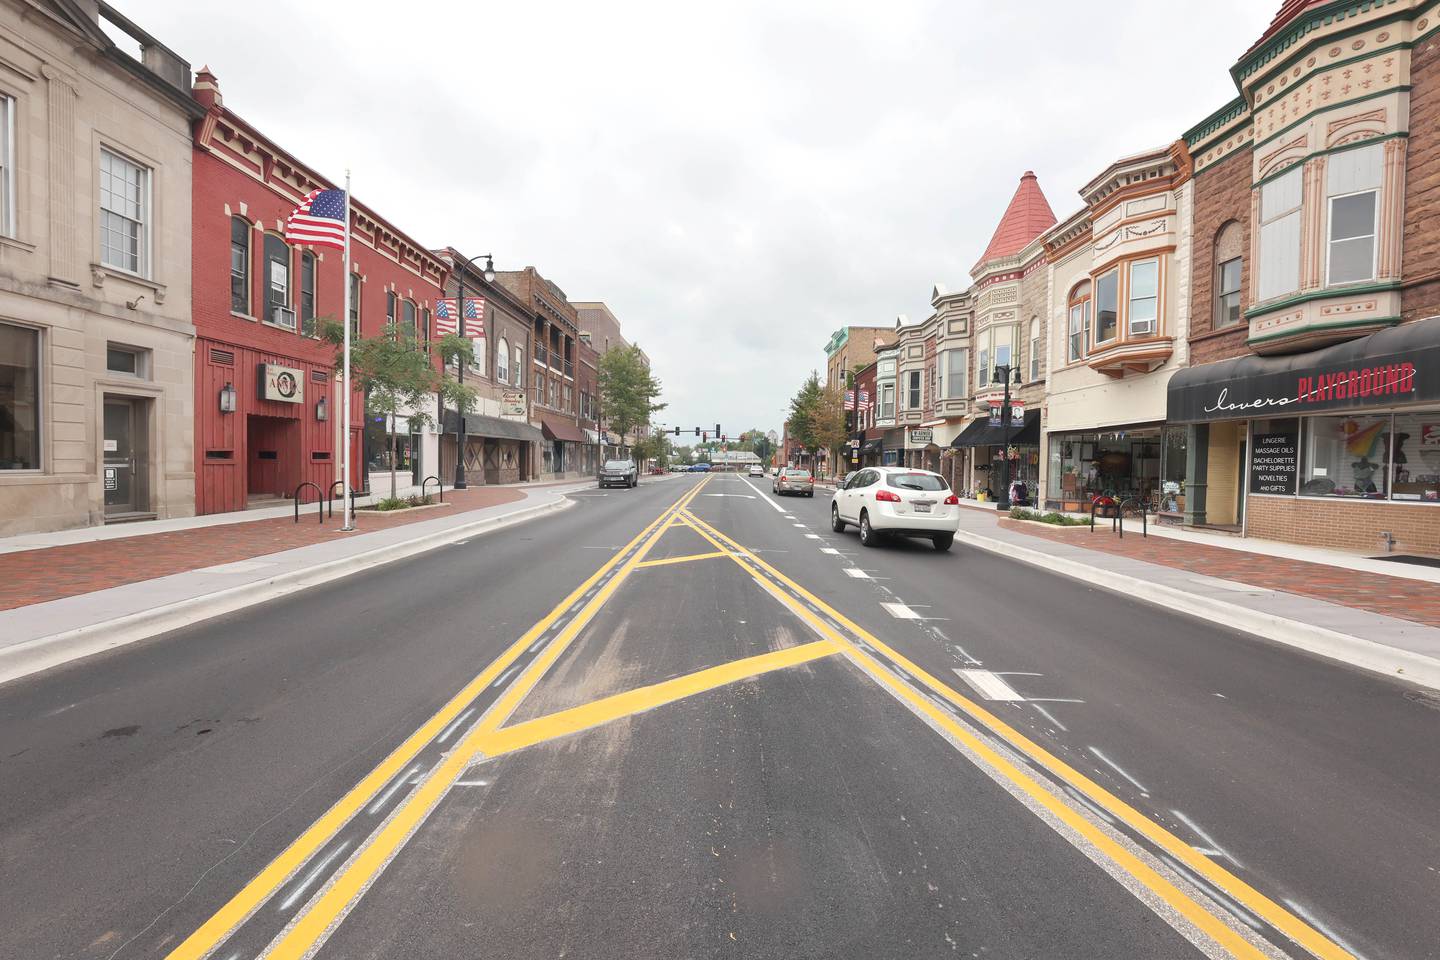 Lincoln Highway Thursday, Aug. 25, 2022, from Second Street looking west after the recent downtown DeKalb renovations.